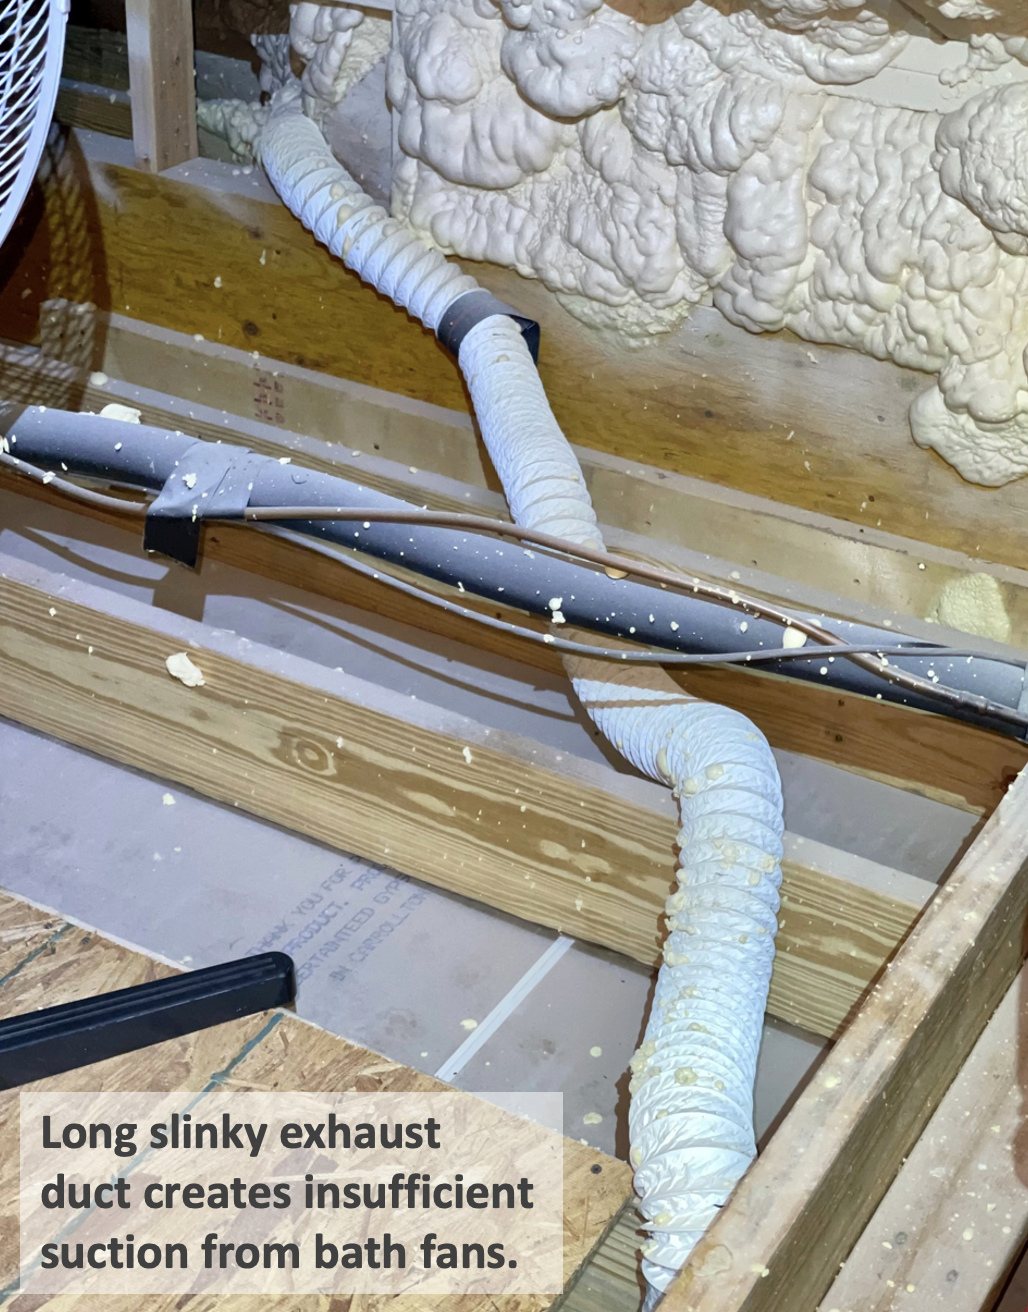 Long curvy bathroom exhaust ducts reduce fan performance.